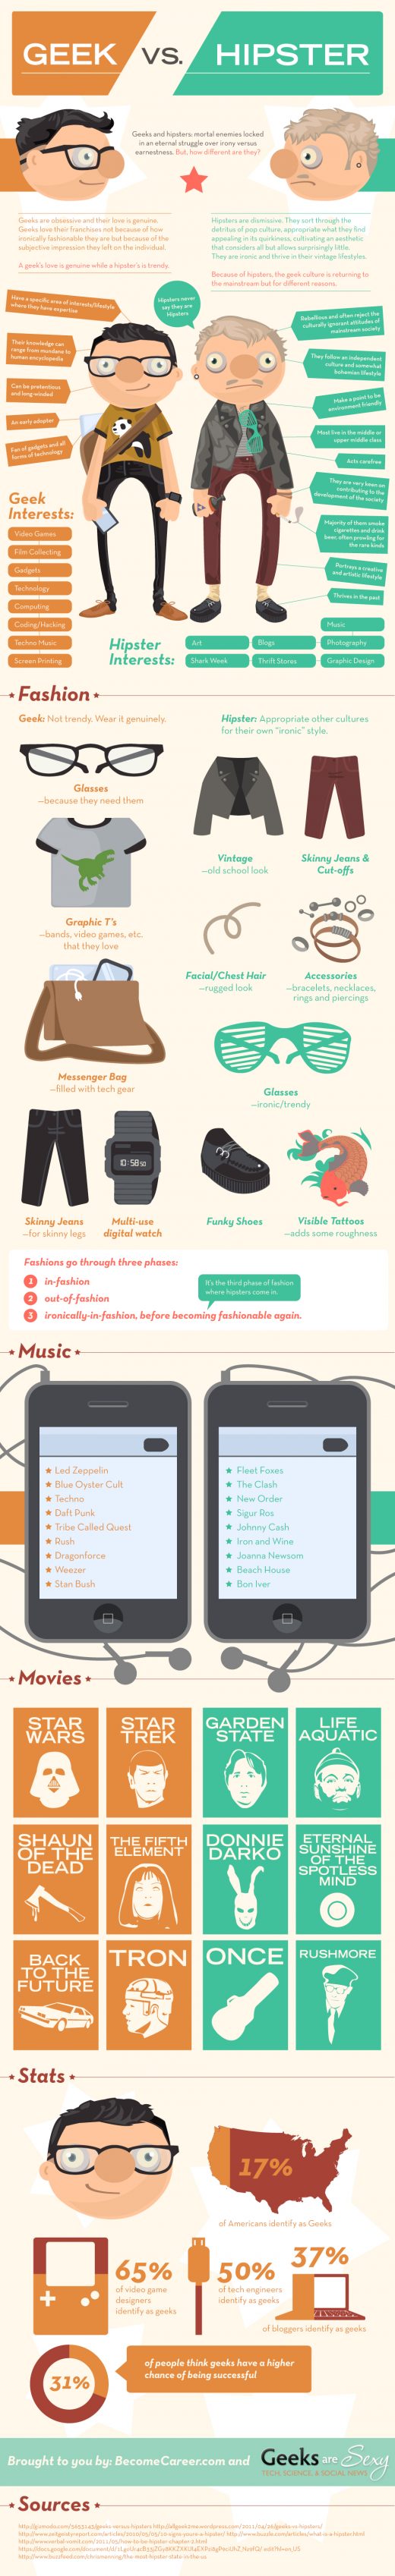 geek-vs-hipster-infographic